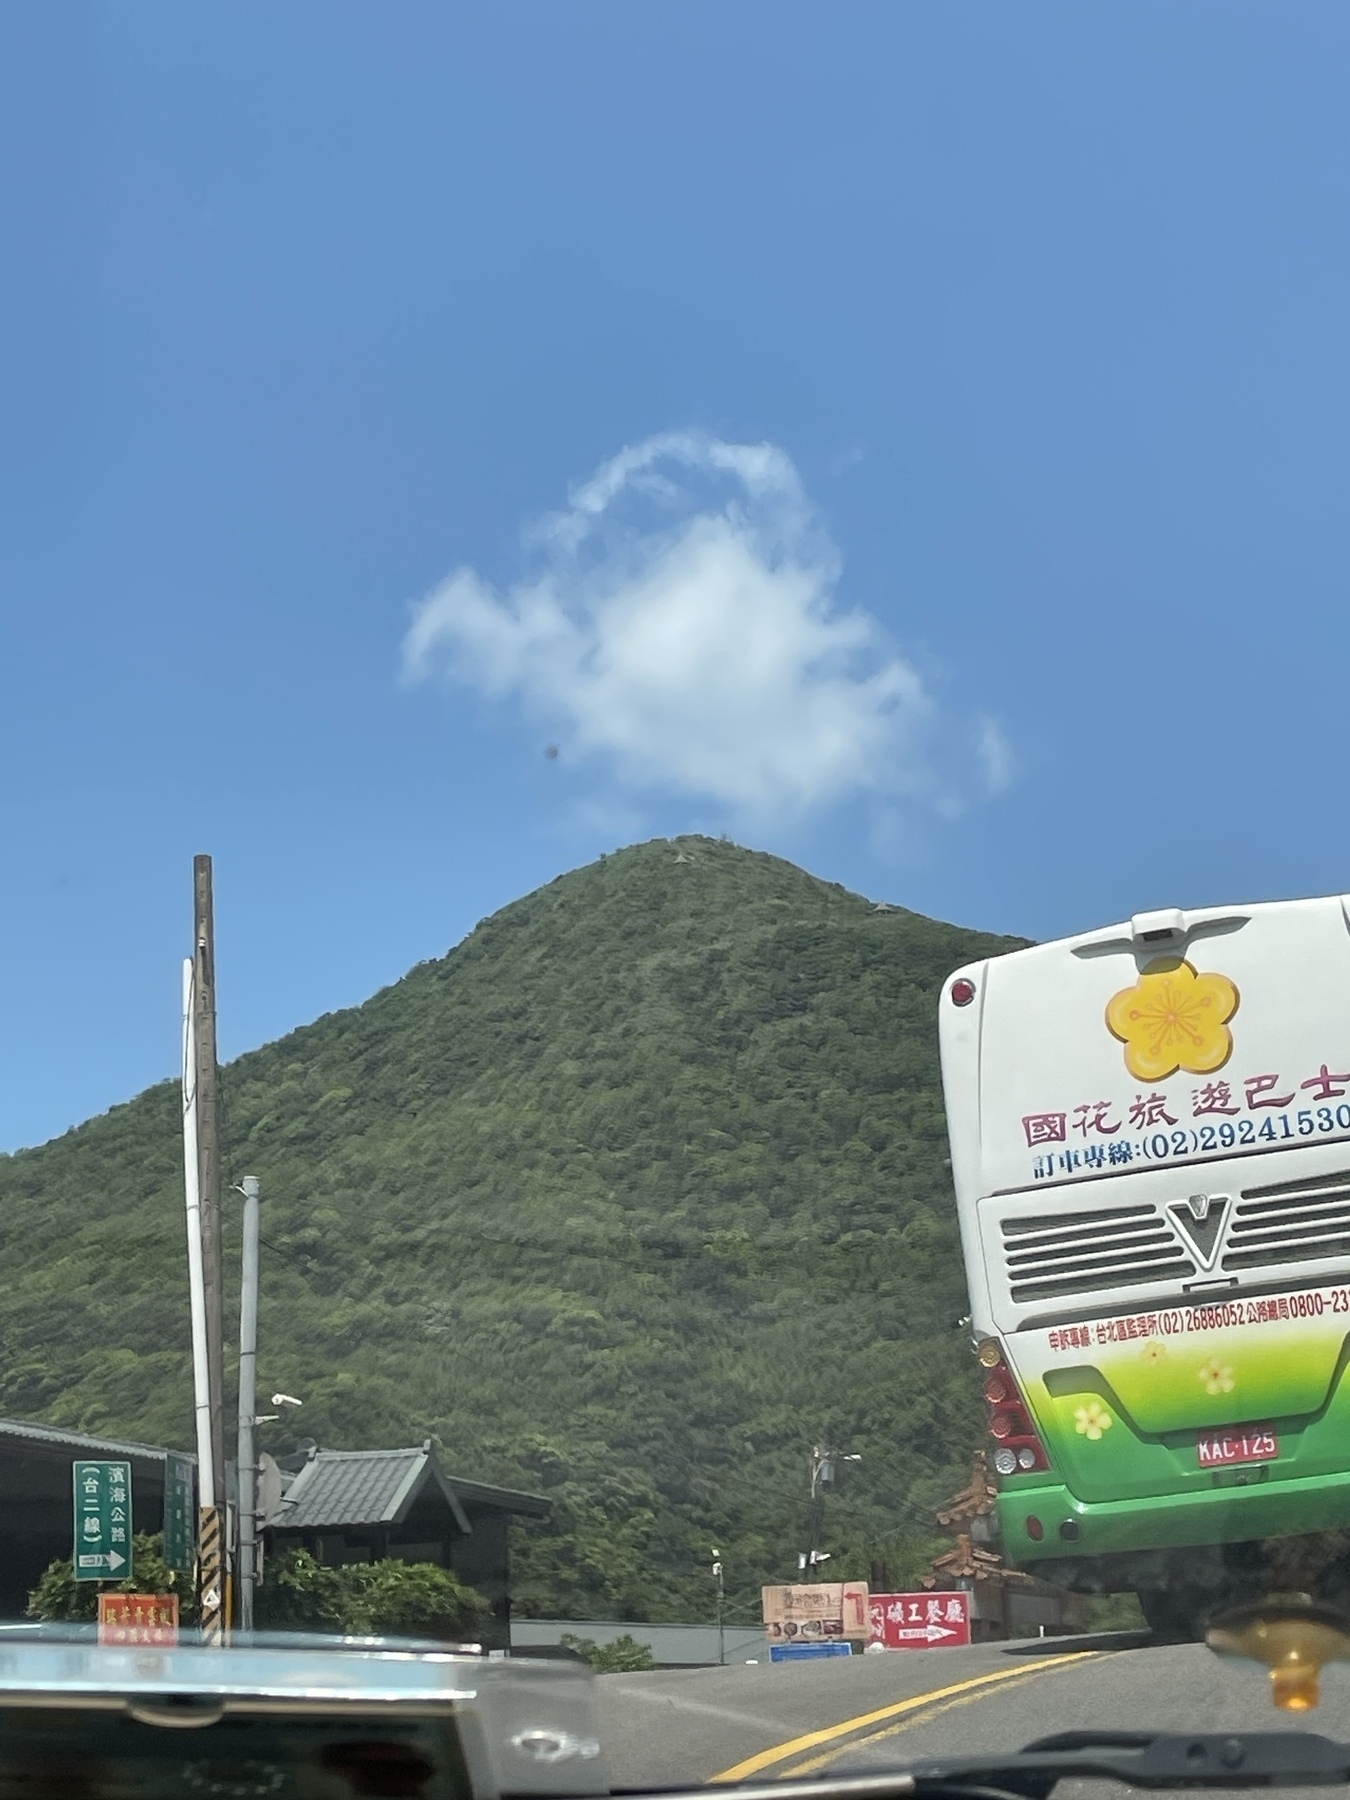 A mountain covered with vegetation near Jioufen in Taiwan. A small thin cloud is seen on the tip of the mountain. A bus is seen on the right side of the photo because Chi took this as she was seated on the front passenger seat while going up the road.